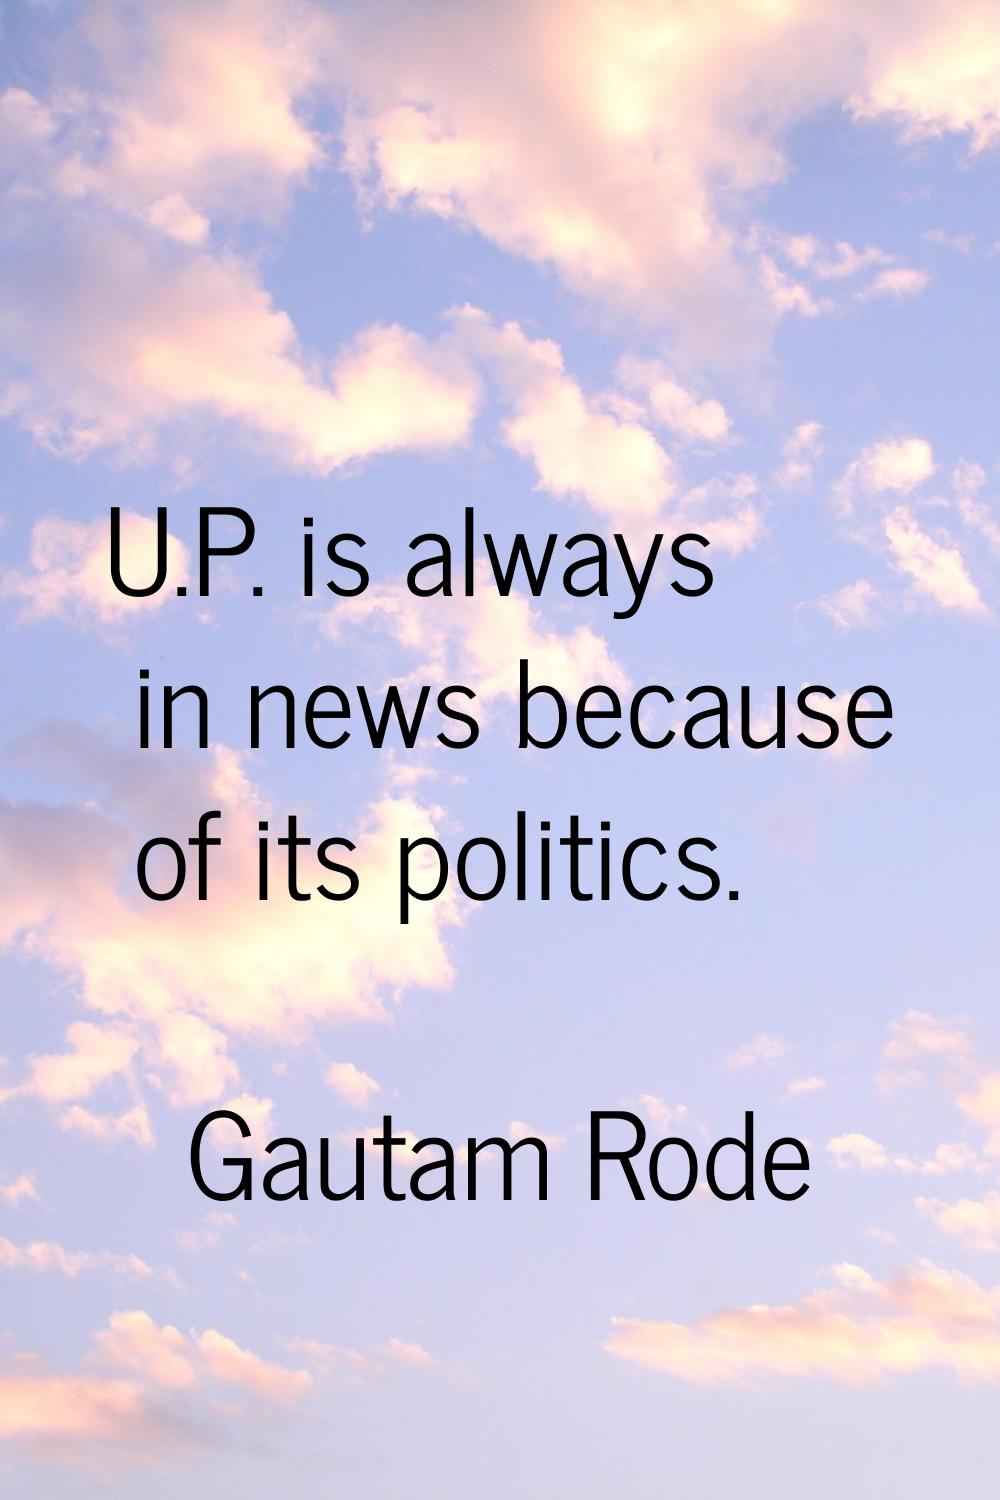 U.P. is always in news because of its politics.